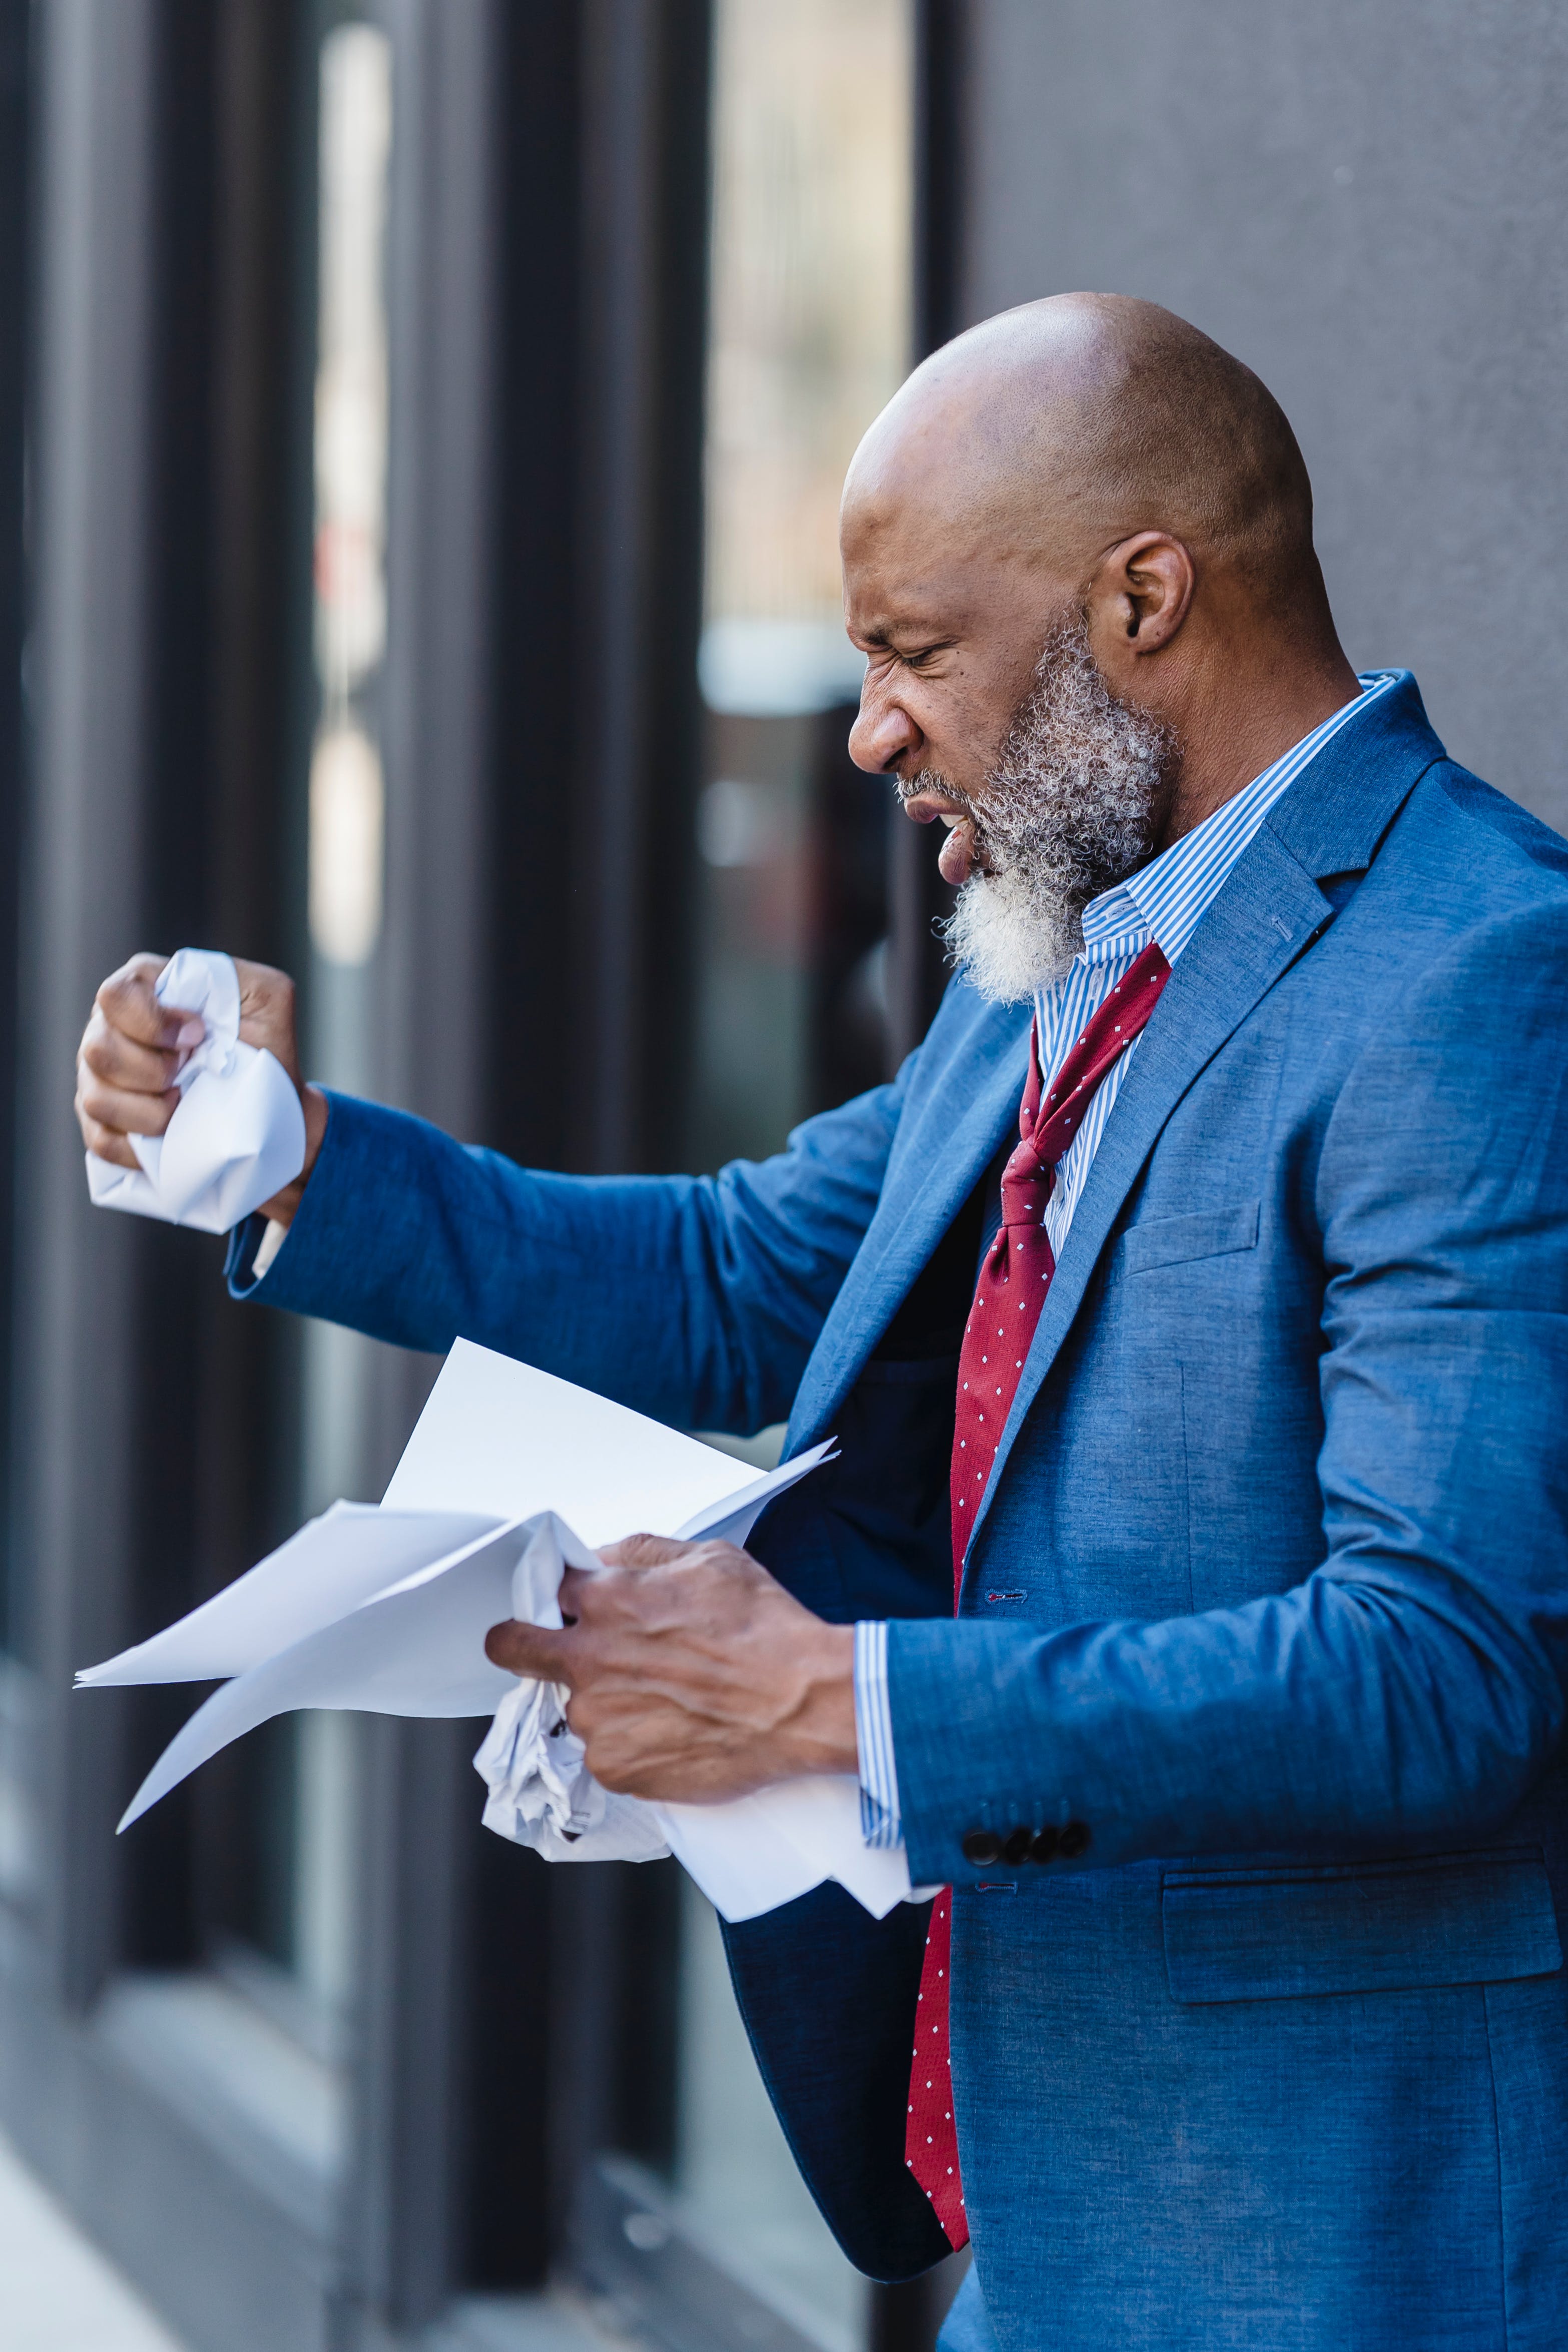 An angry business man crumpling documents. | Source: Pexels